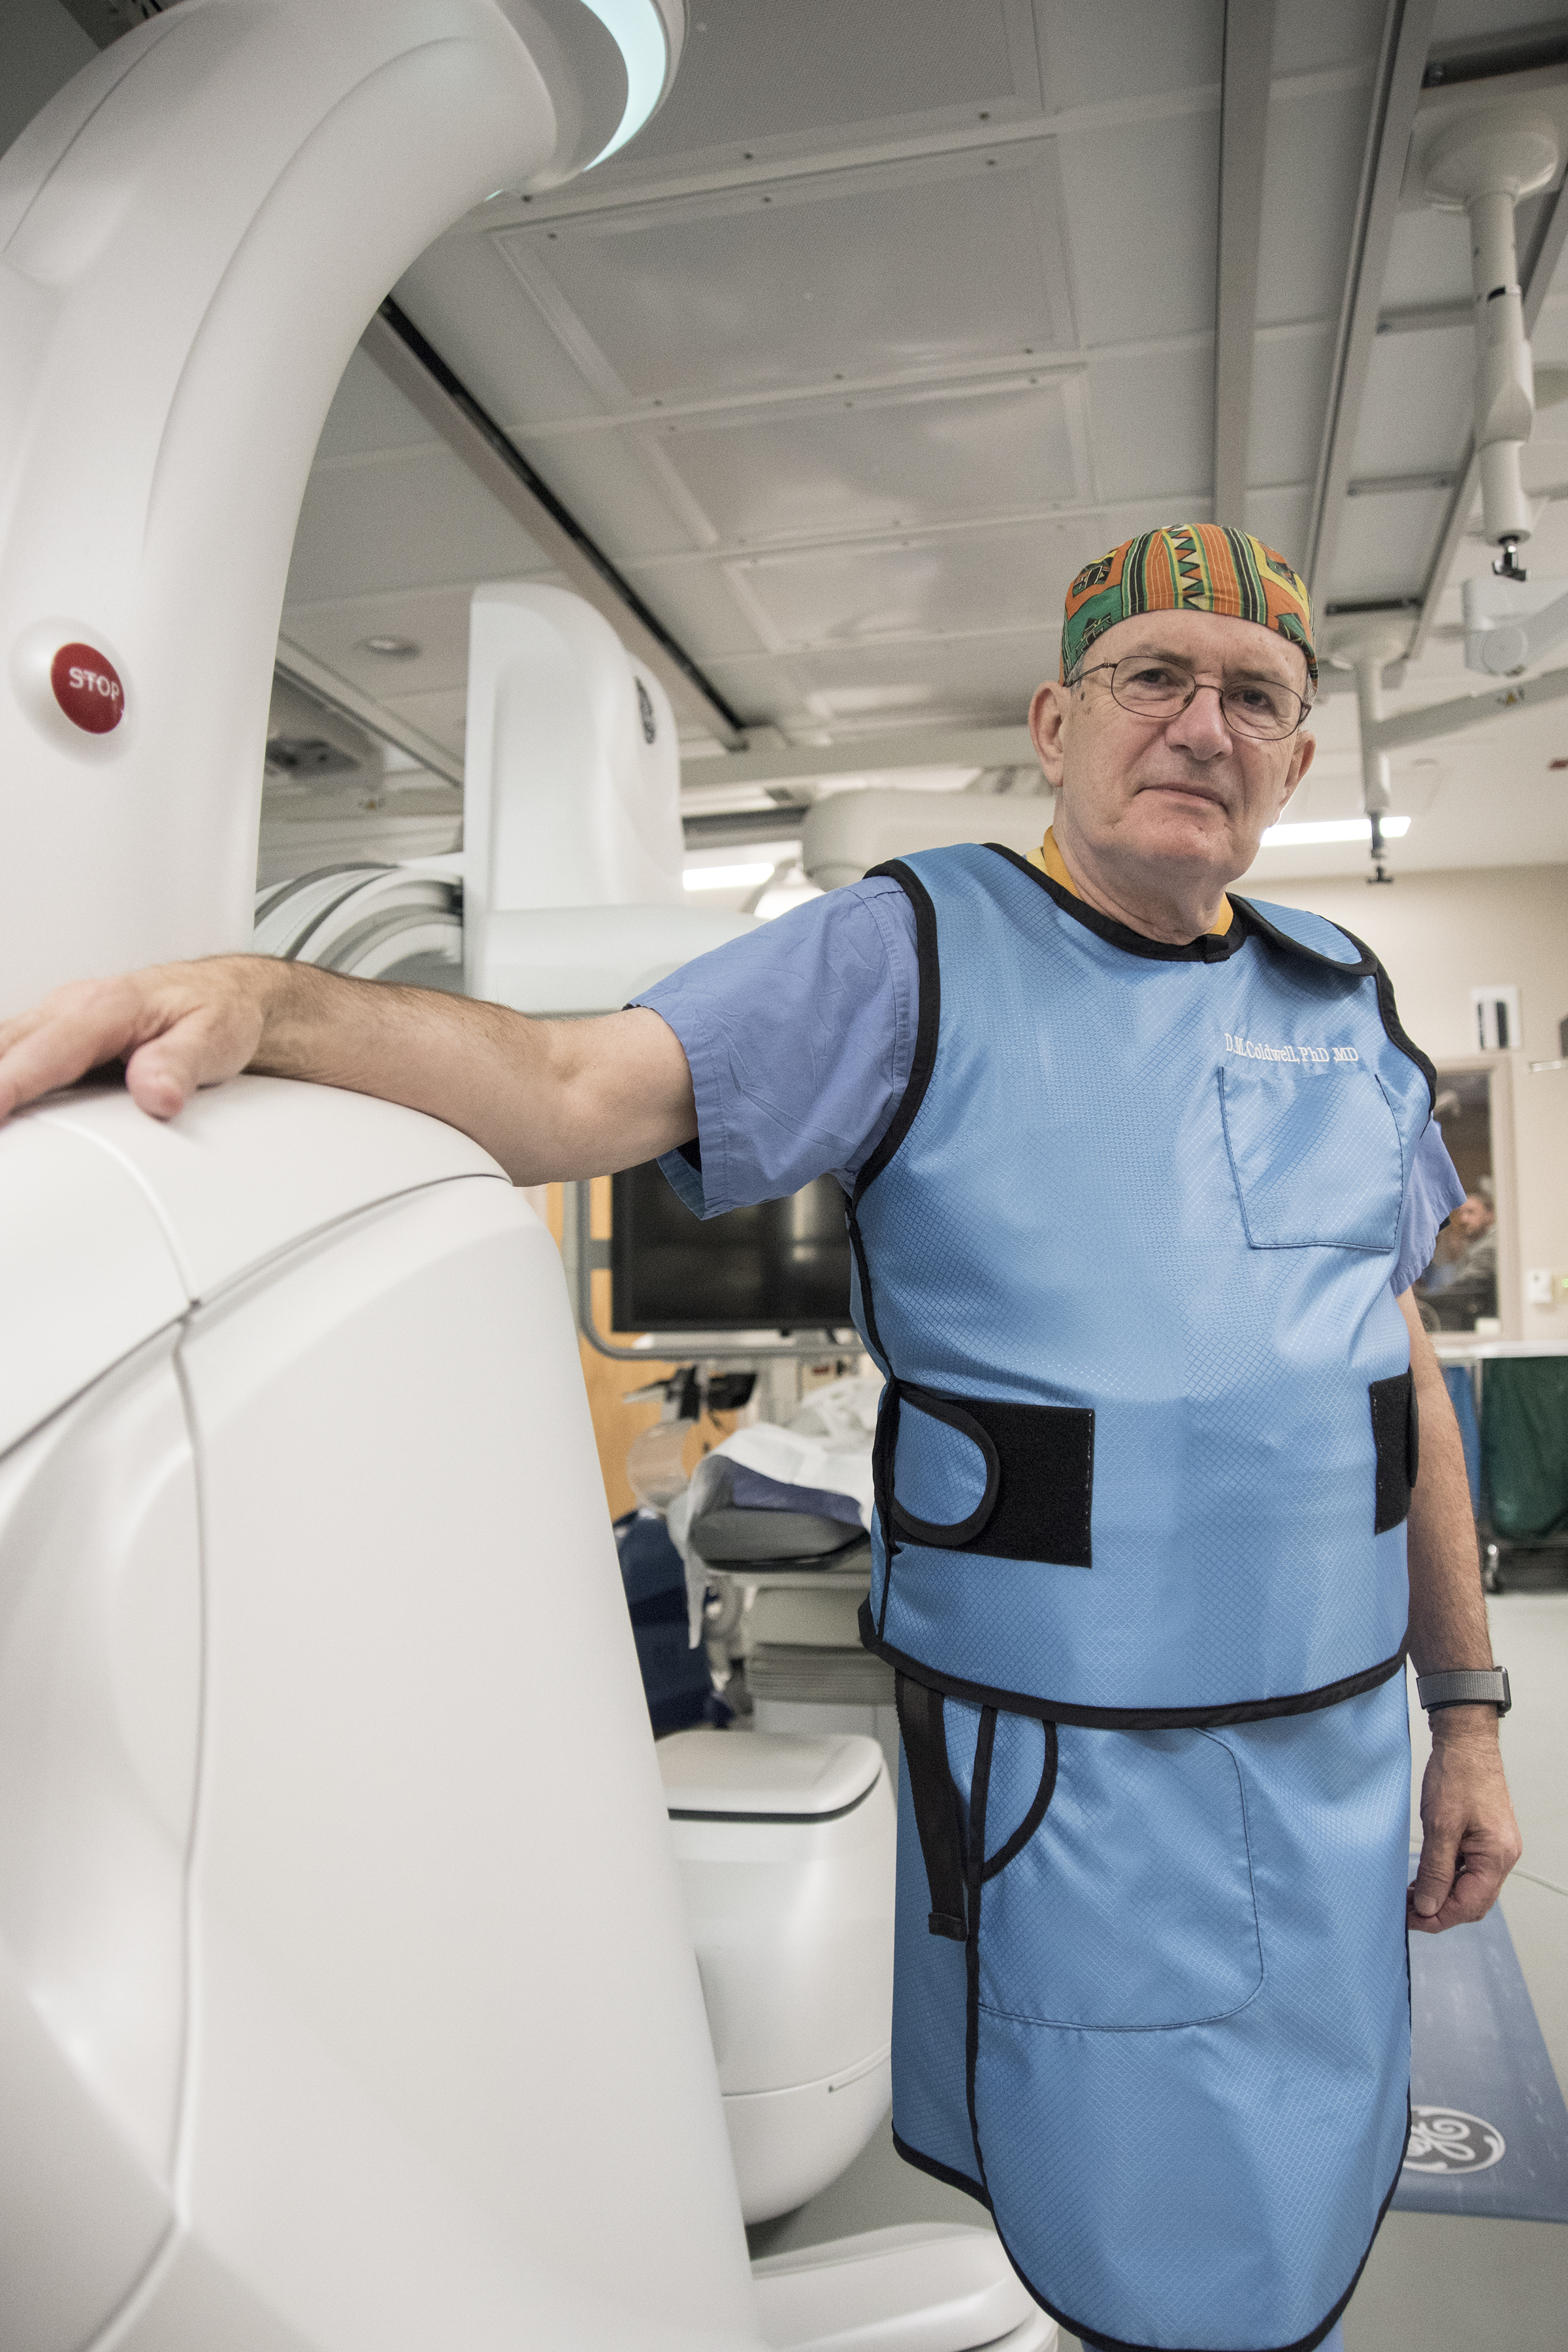 UofL Hospital first in region to use advanced new imaging system